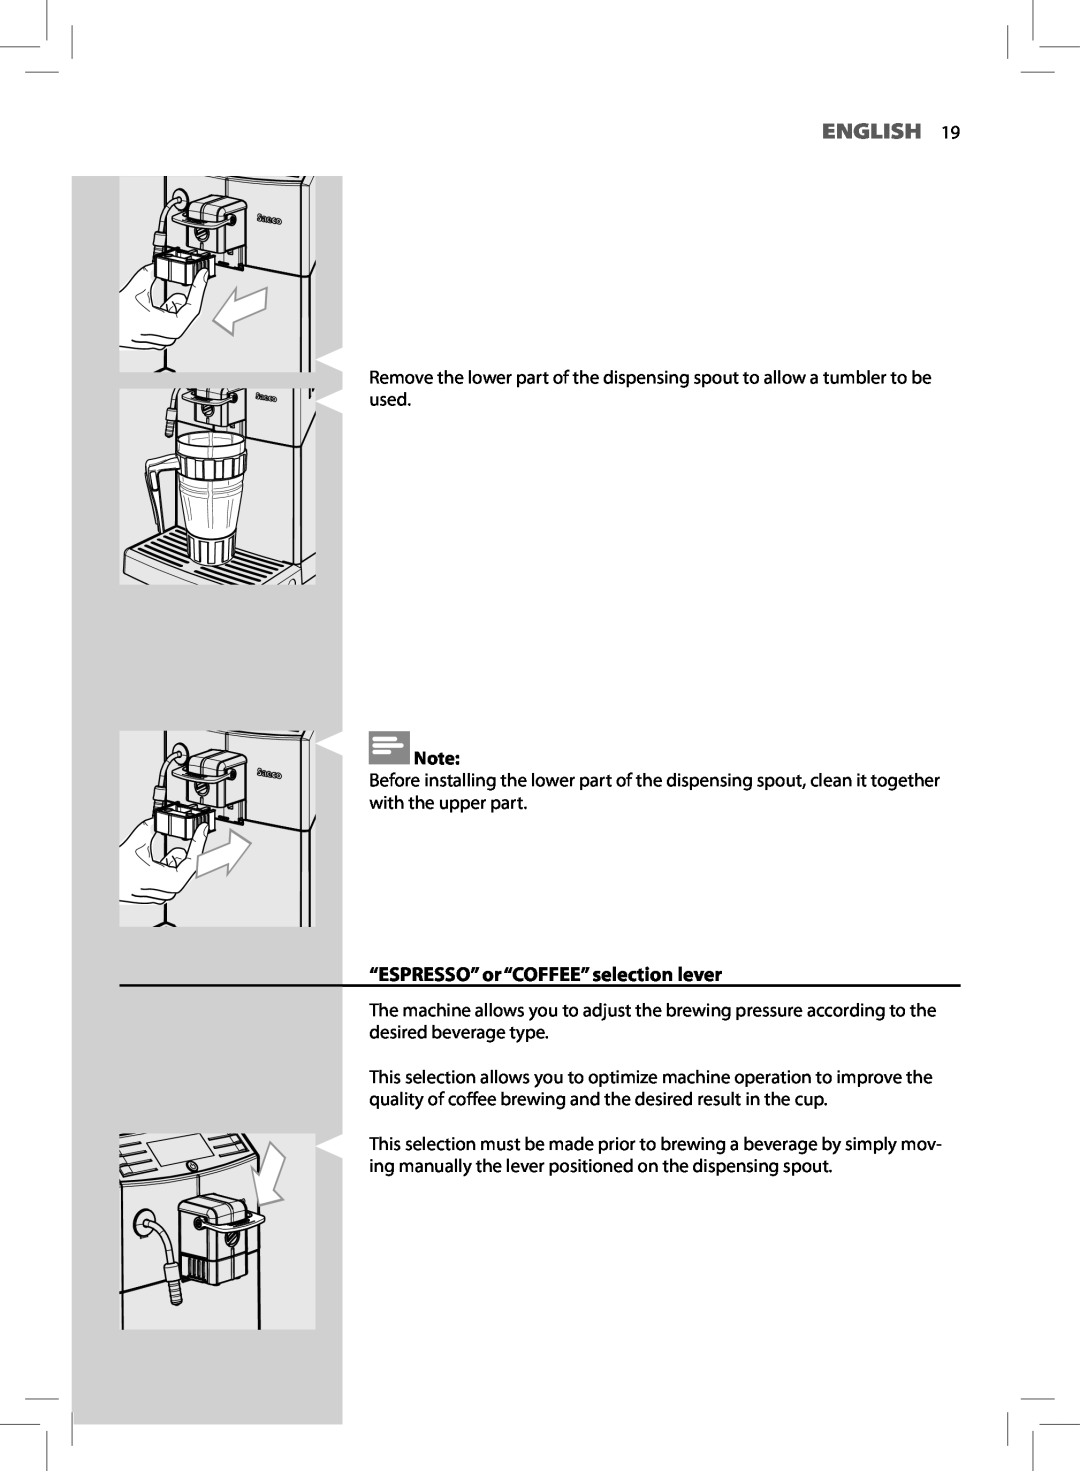 Saeco Coffee Makers HD8772 user manual English, “ESPRESSO” or “COFFEE” selection lever 